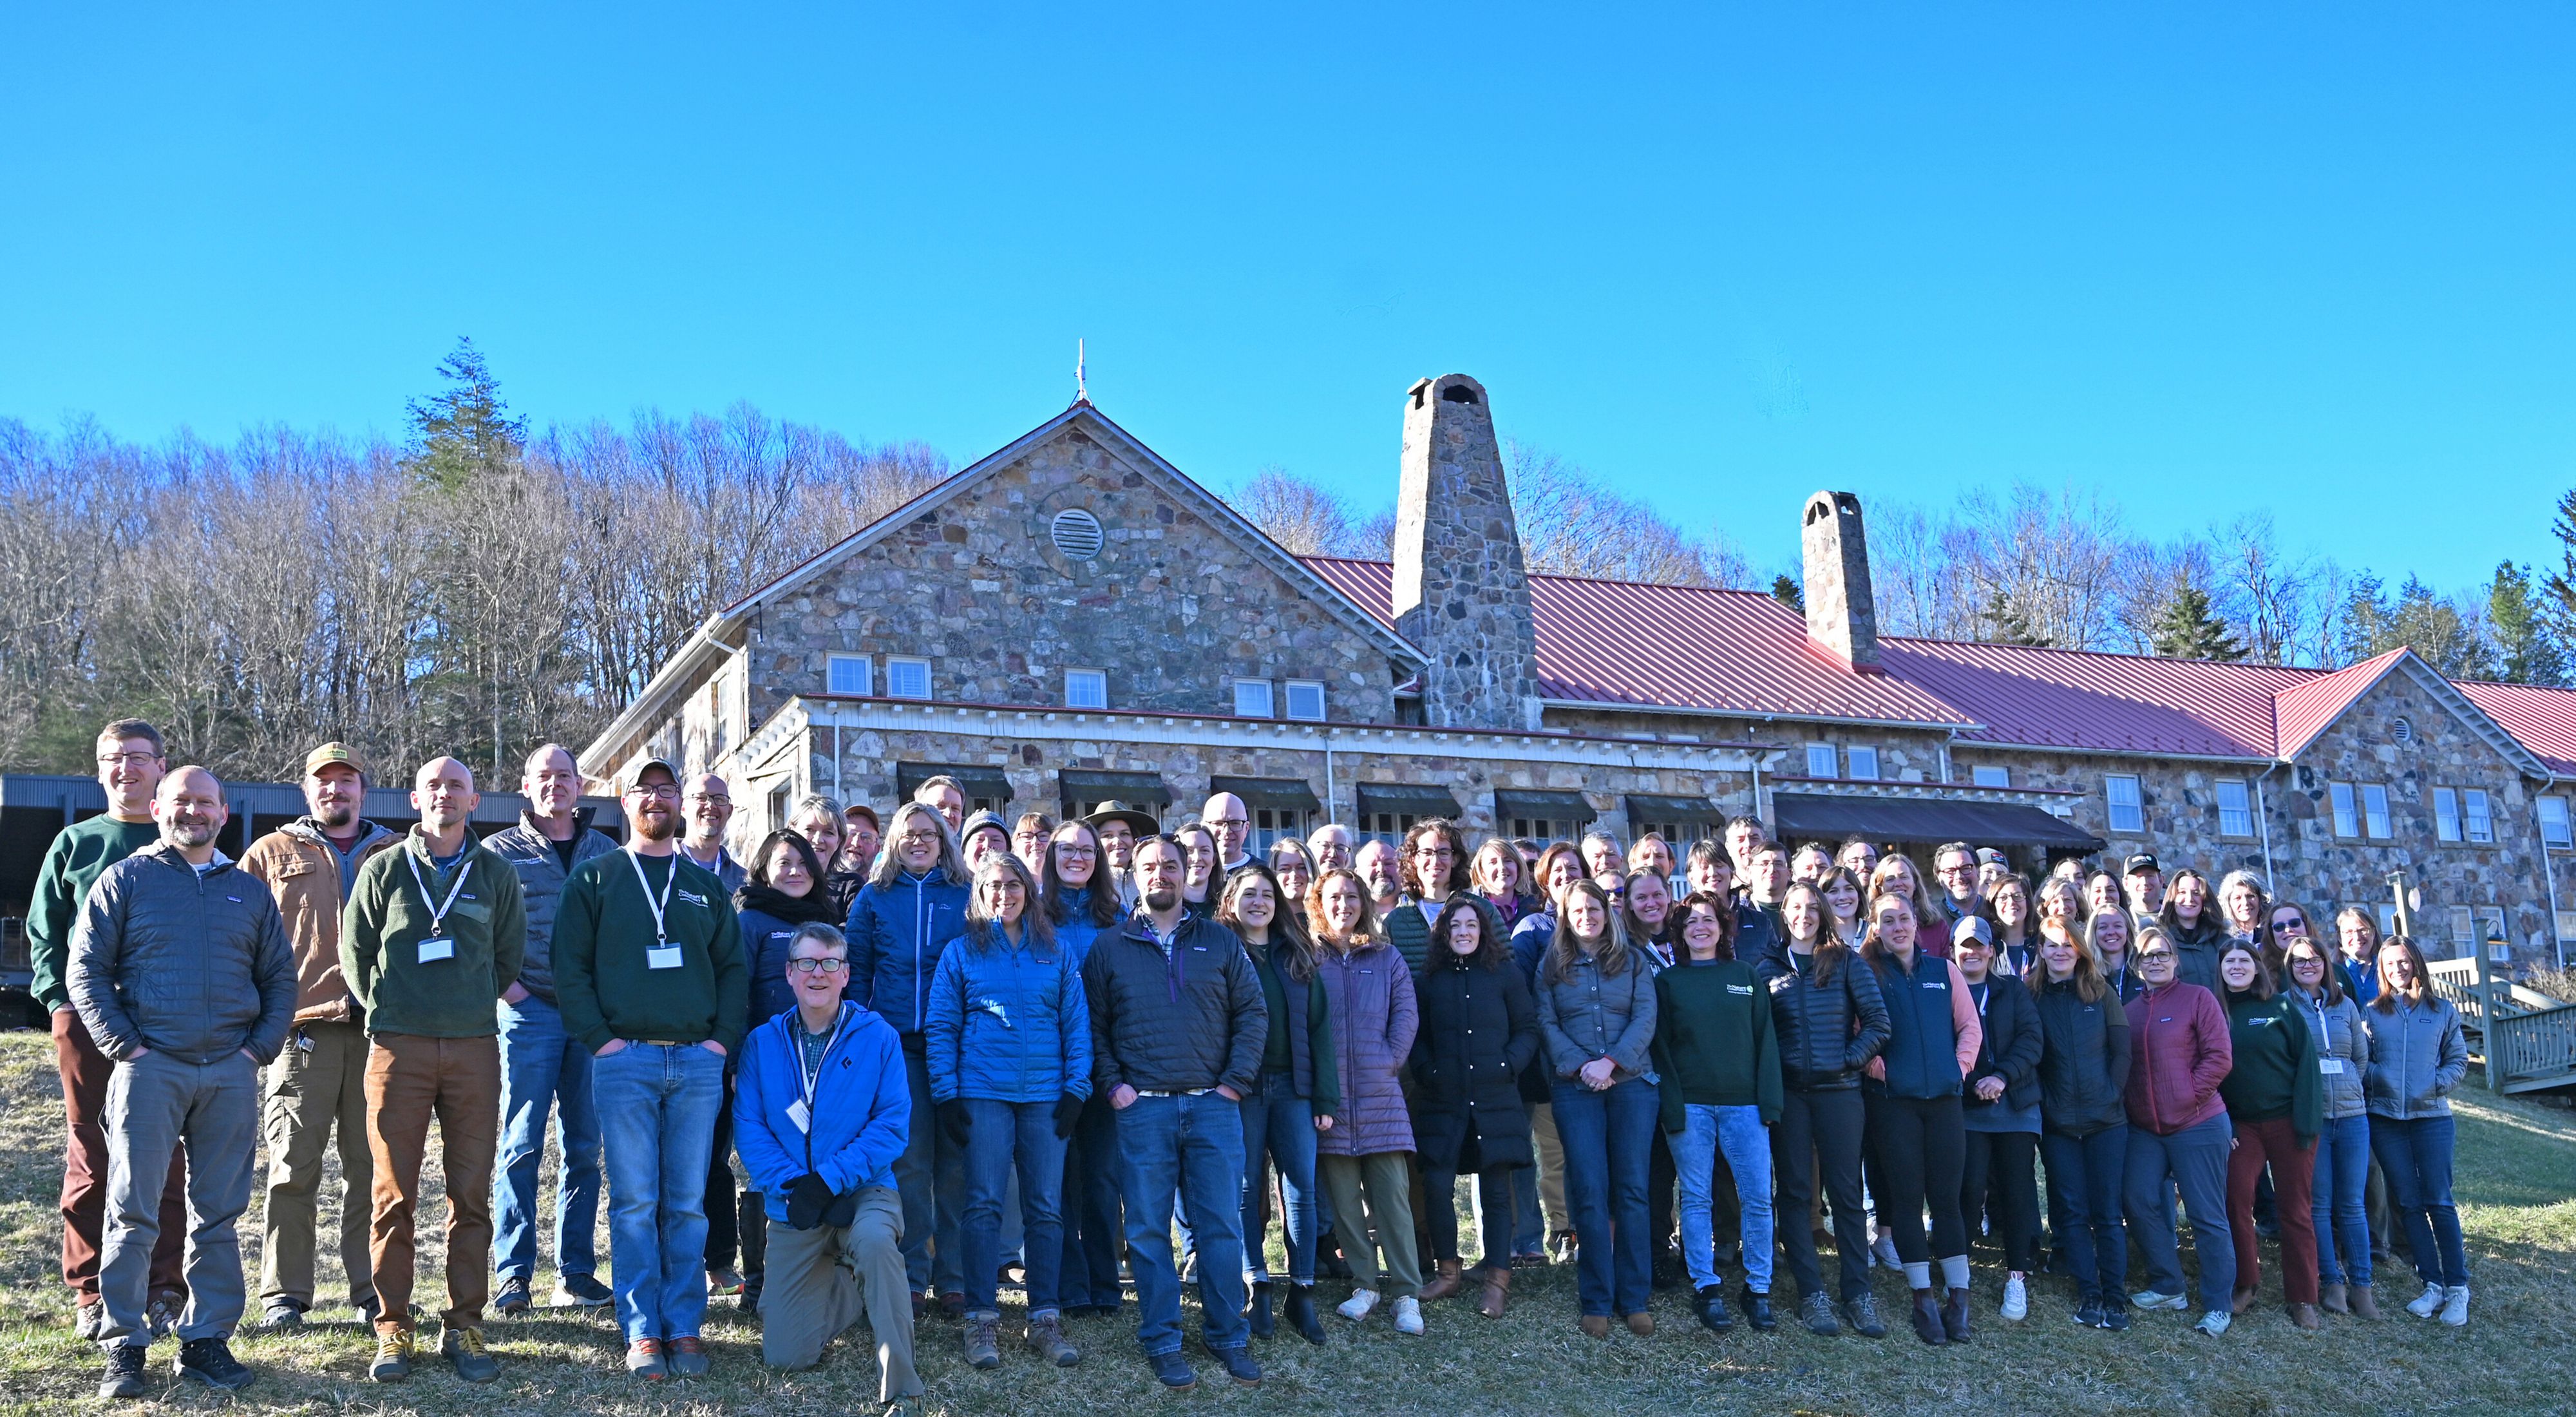 Group photo of TNC VA staff. A large group of people stand together outdoors in front of Mountain Lake Lodge during the chapter's annual staff retreat.